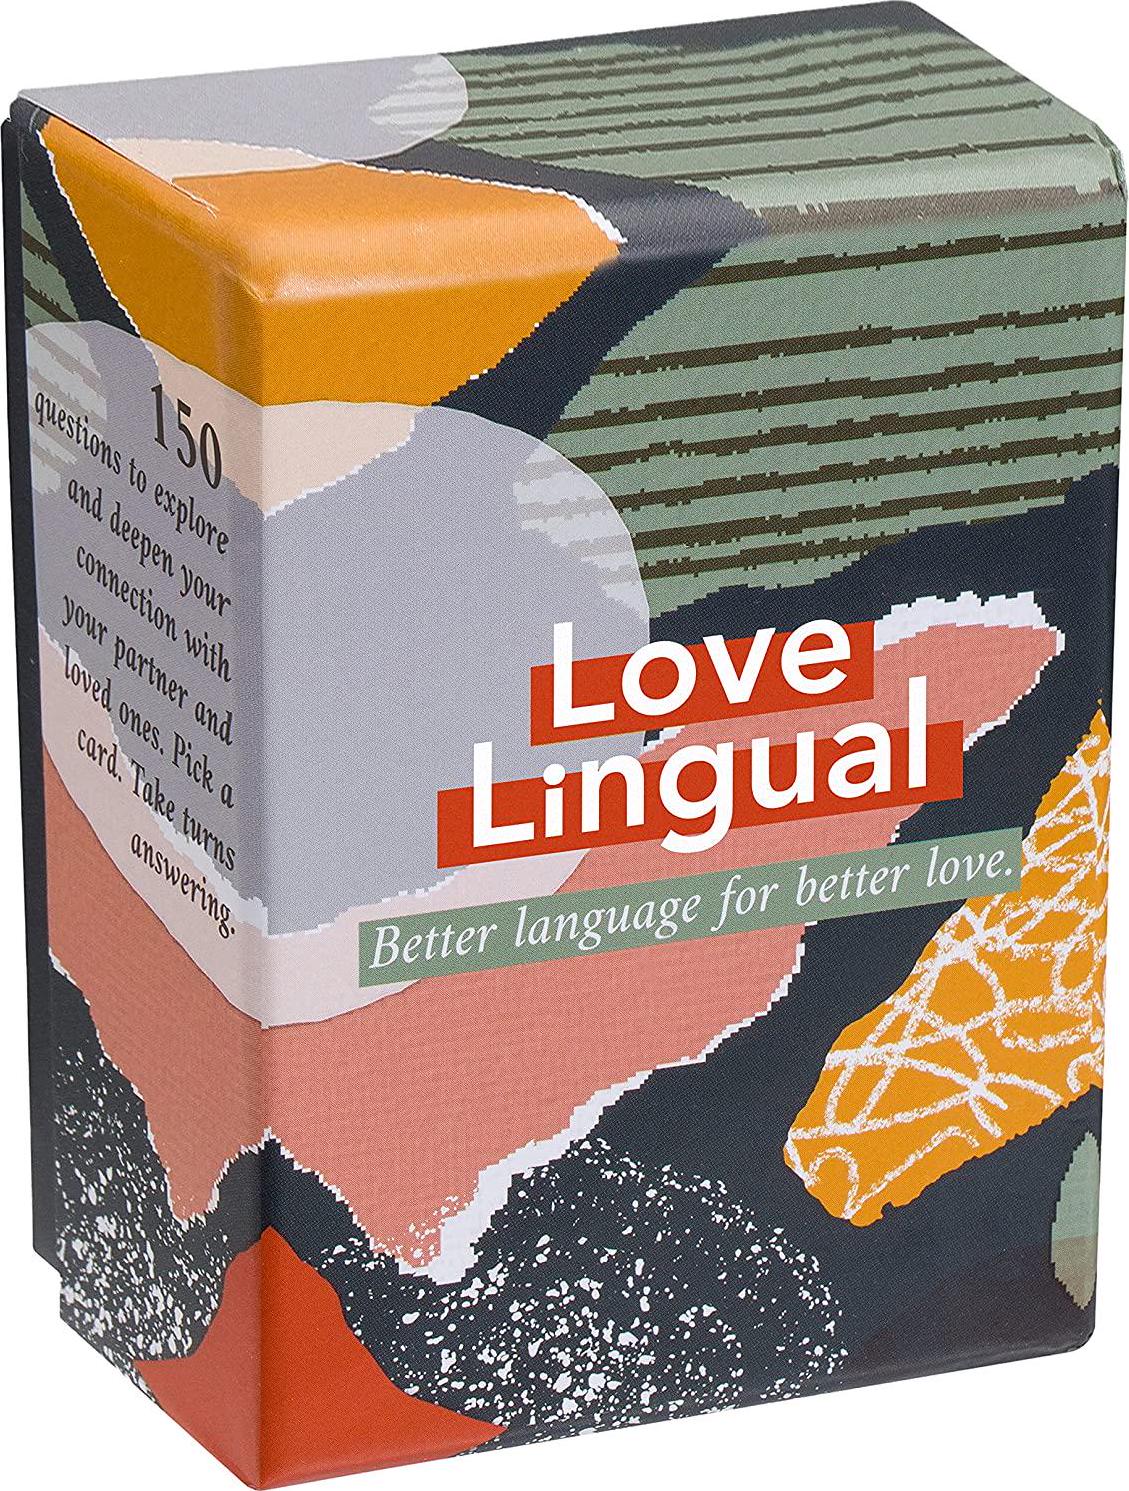 FLUYTCO, Love Lingual: Card Game - Better Language for Better Love - 150 Conversation Starter Questions for Couples - to Explore and Deepen Connections with Your Partner - Date Night and Relationship Cards